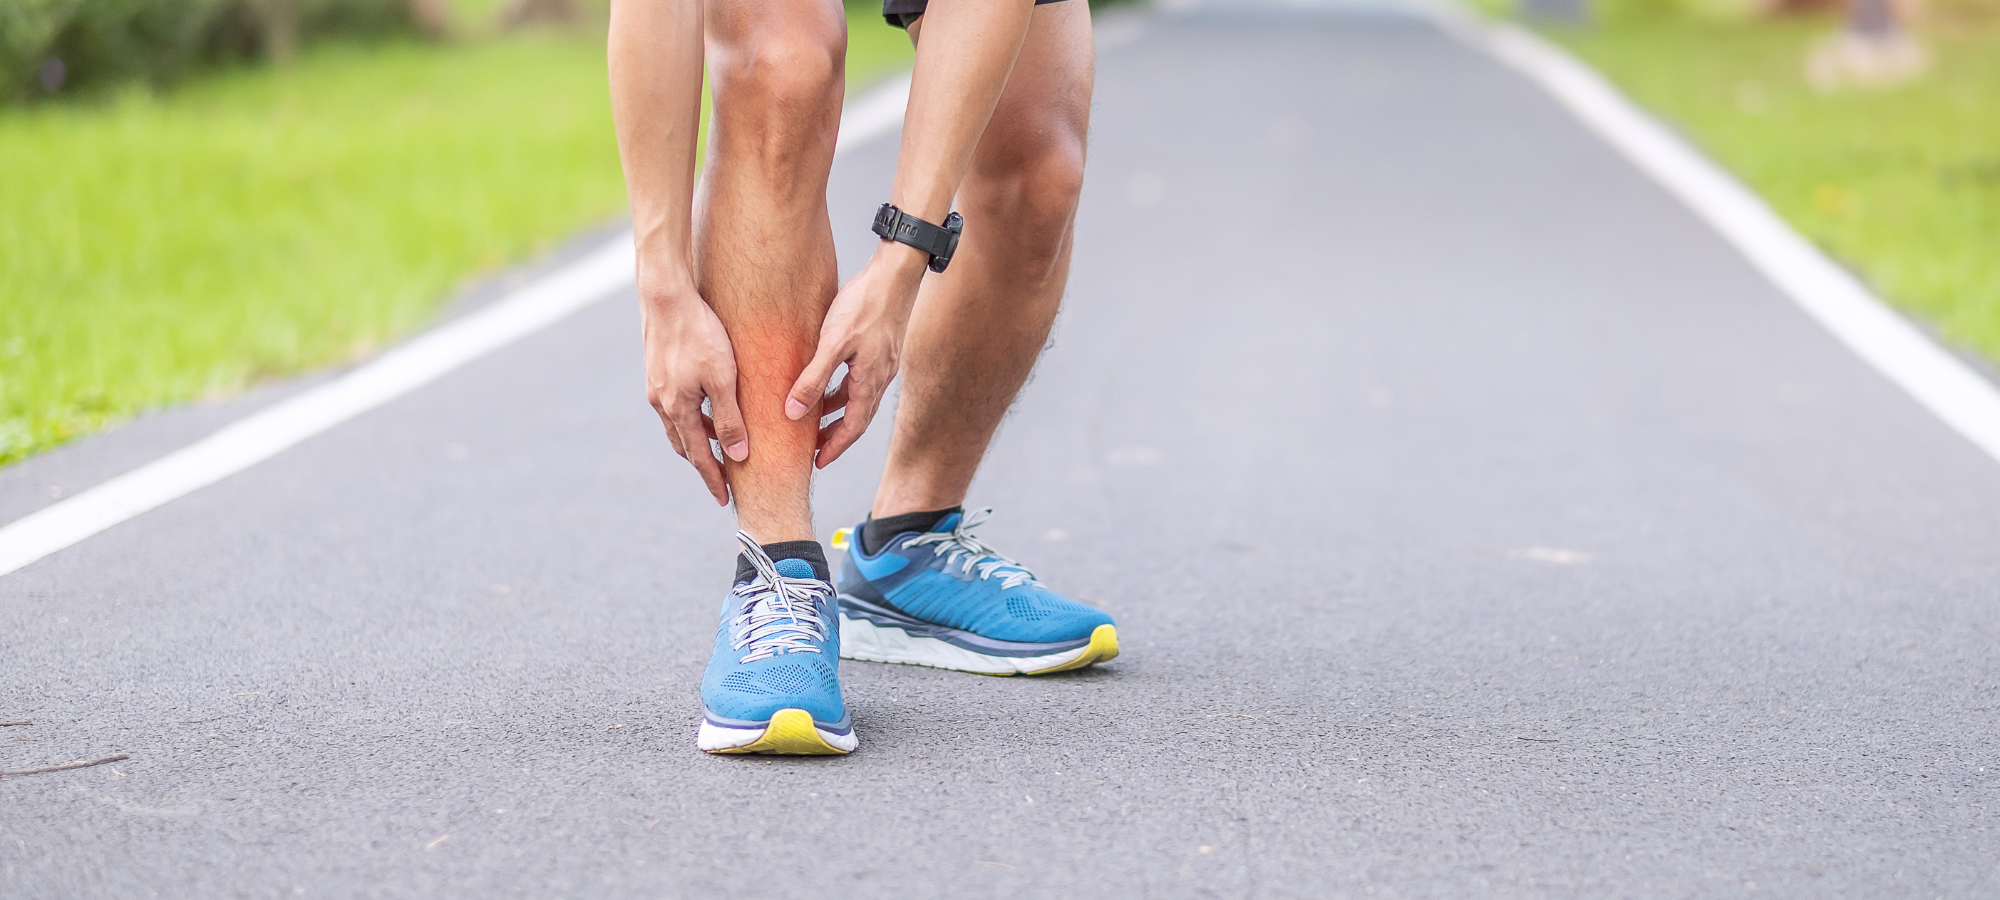 Everything You Need to Know About Shin Splints